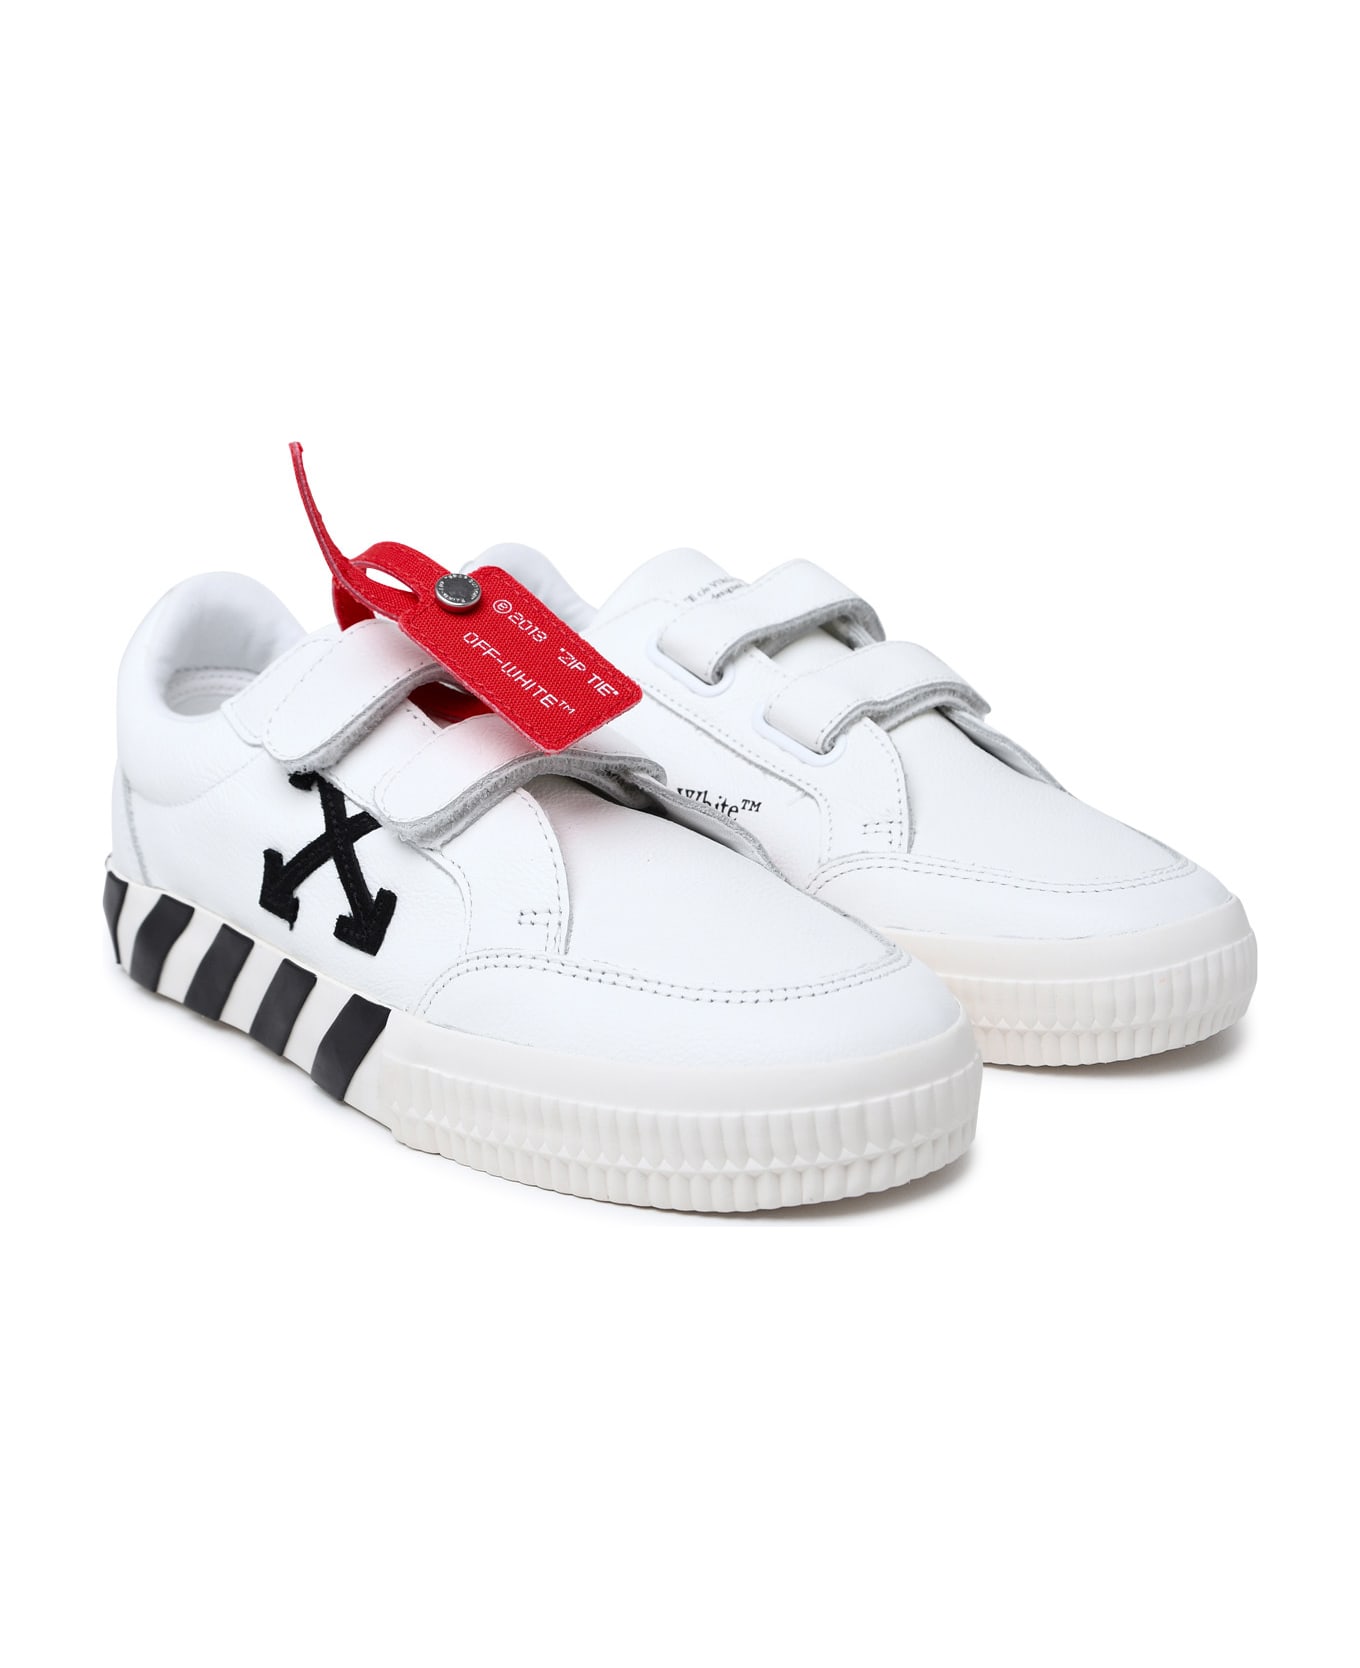 Off-White 'vulcanized' White Leather Sneakers - White